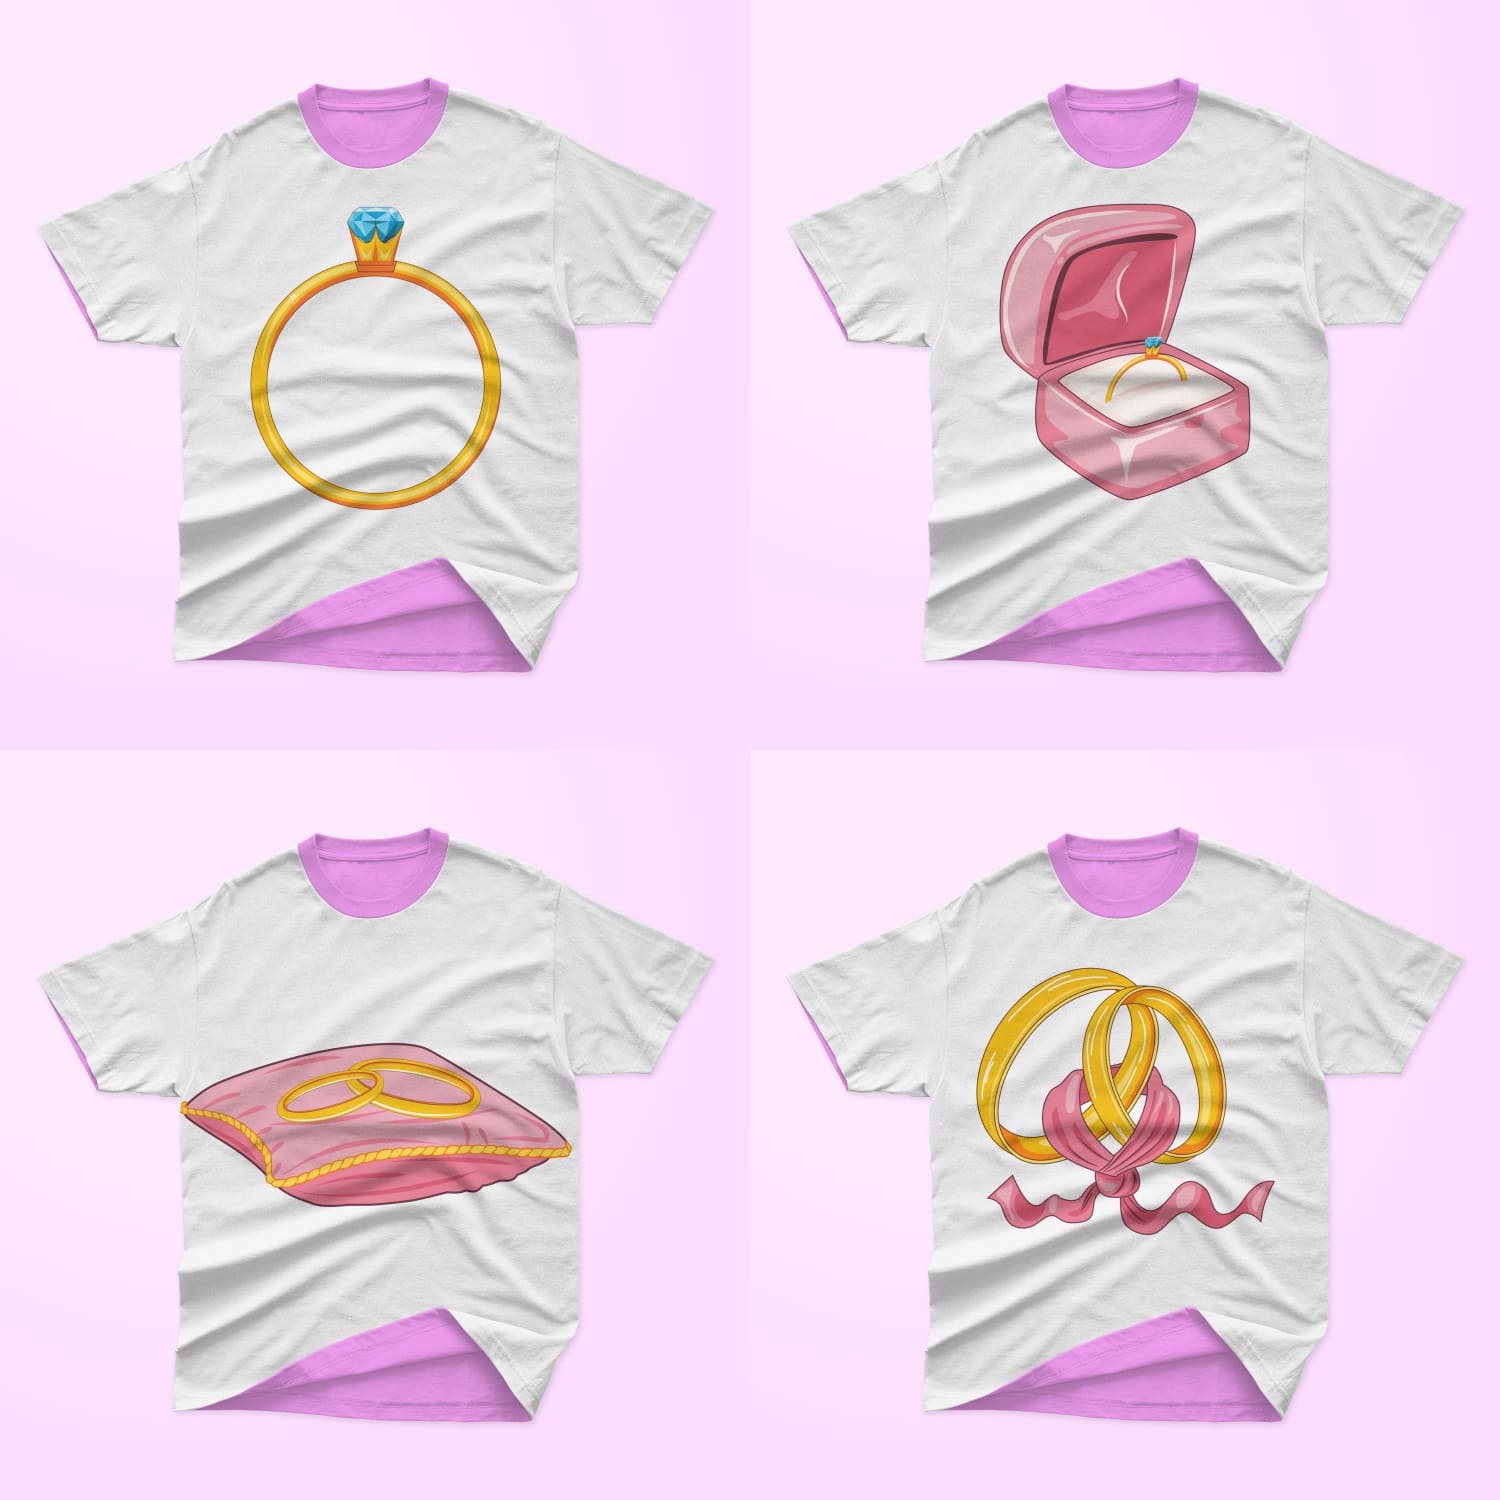 Four light gray t-shirts with a pink collar and images of gold wedding rings.